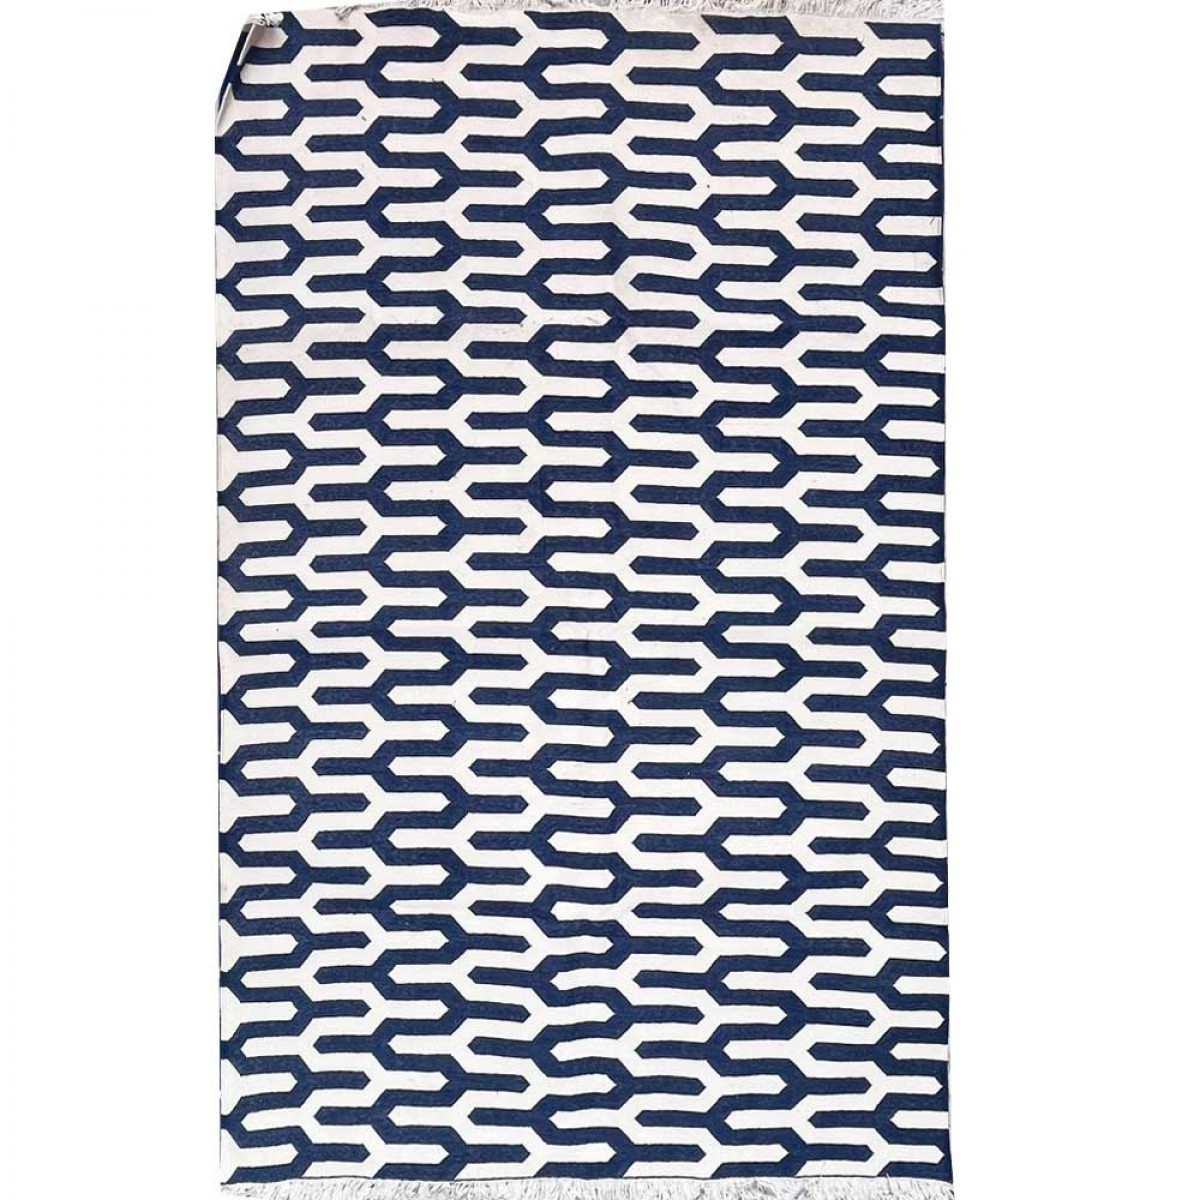 Cotton Floor Rugs - Blue and White Chain (Made to Order)